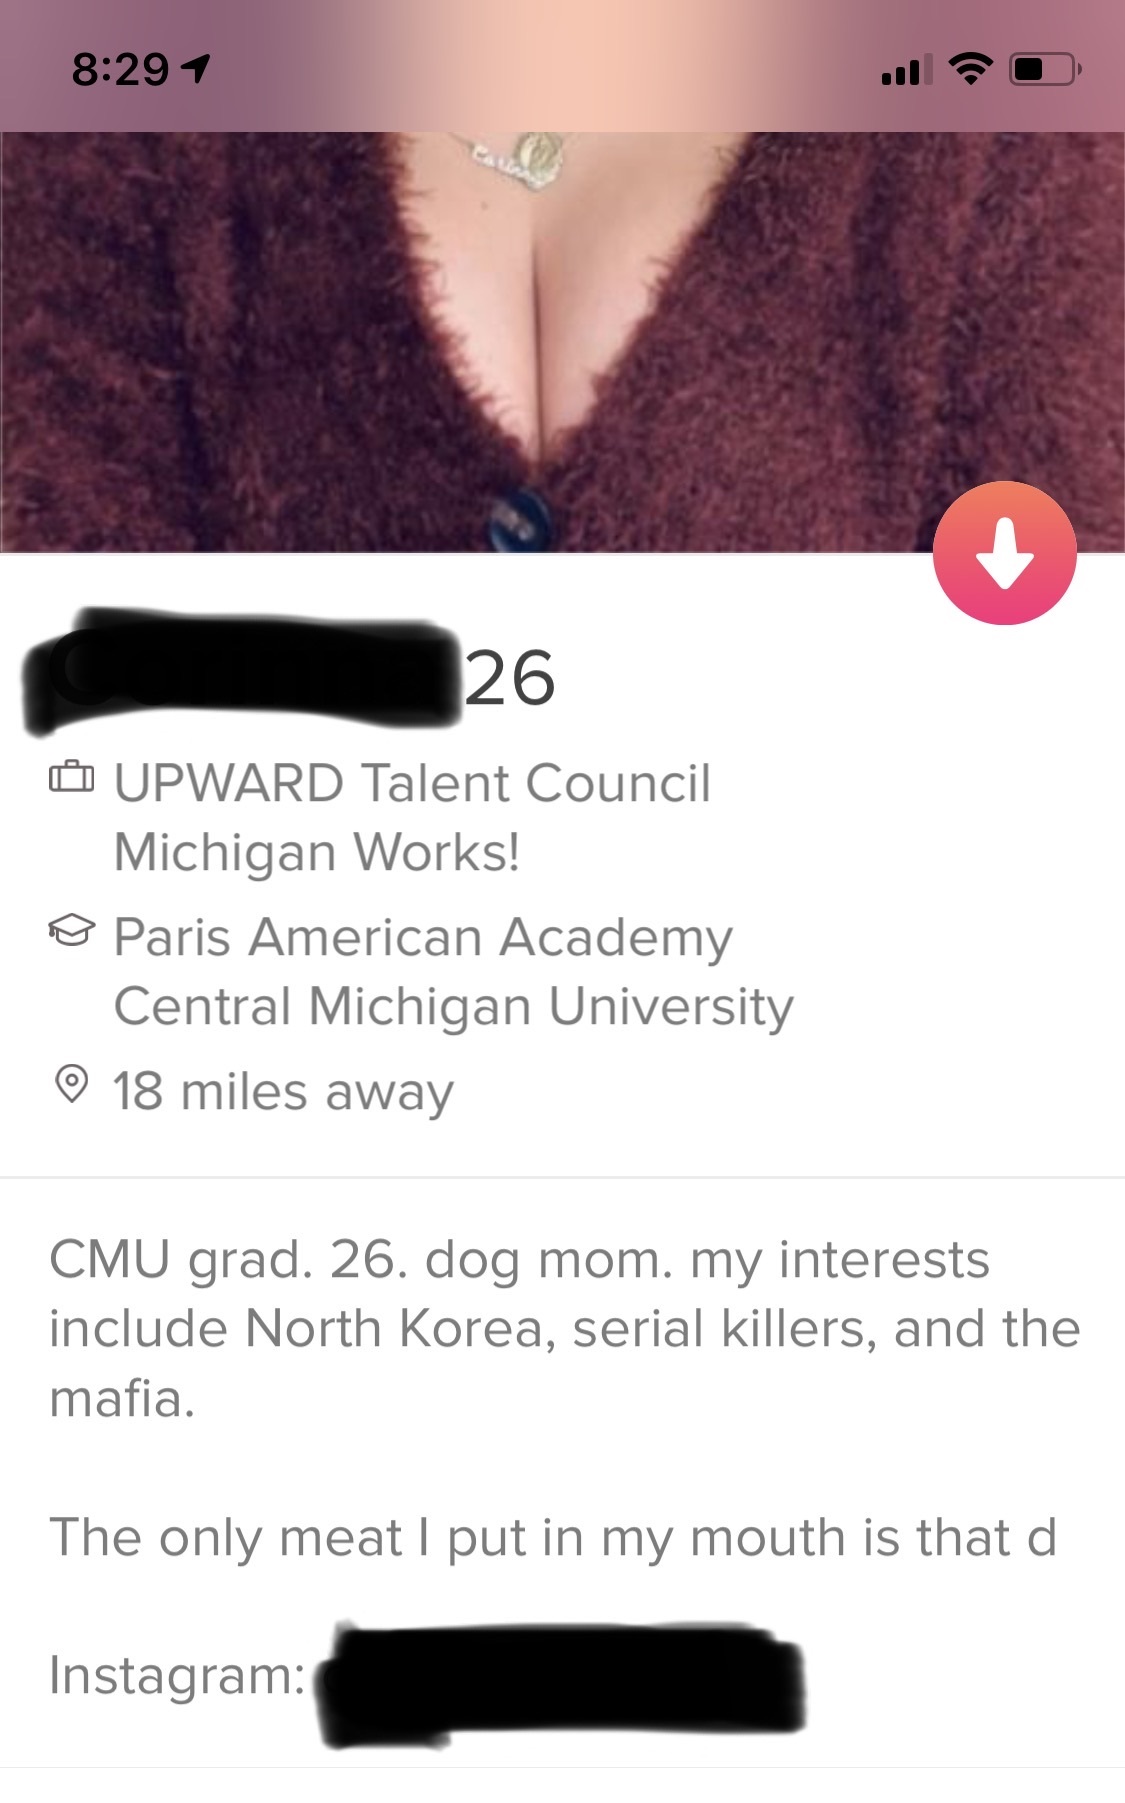 Paris American Academy Central Michigan University 18 miles away Cmu grad. 26. dog mom. my interests include North Korea, serial killers, and the mafia. The only meat I put in my mouth is that d Instagram